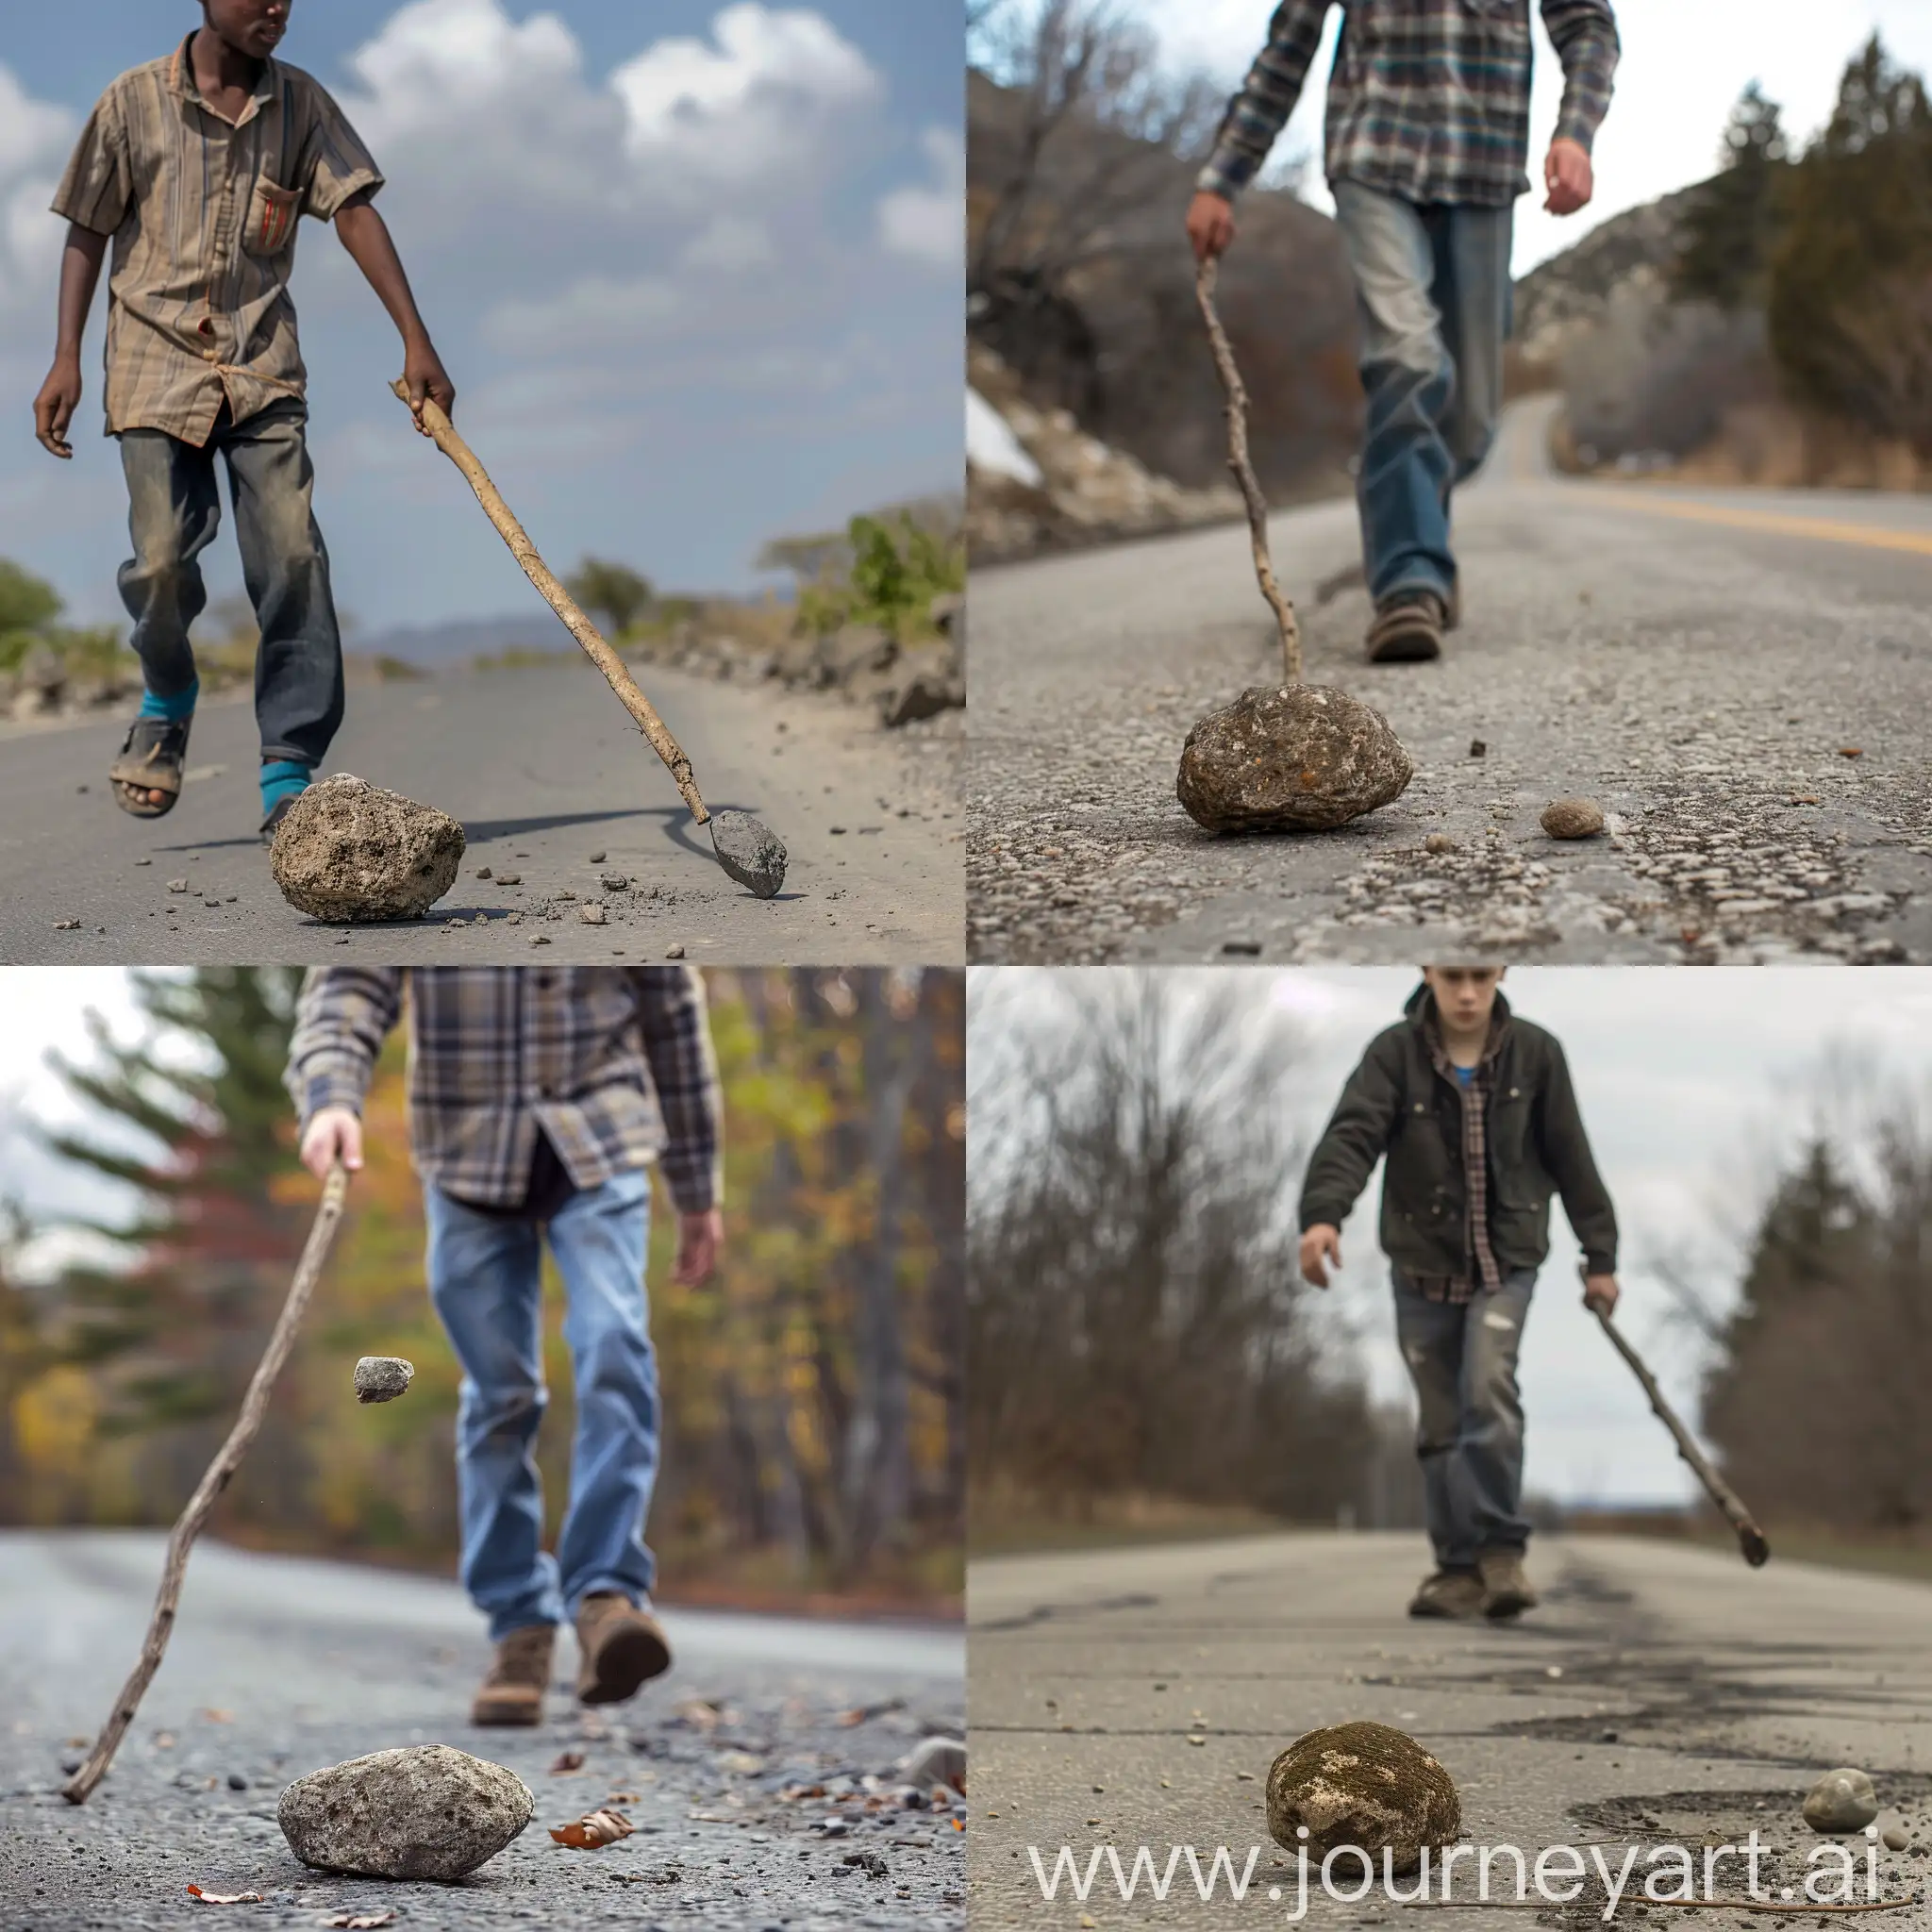 A young man walking on a road carrying a stick in his hand finds a medium-sized rock in front of him